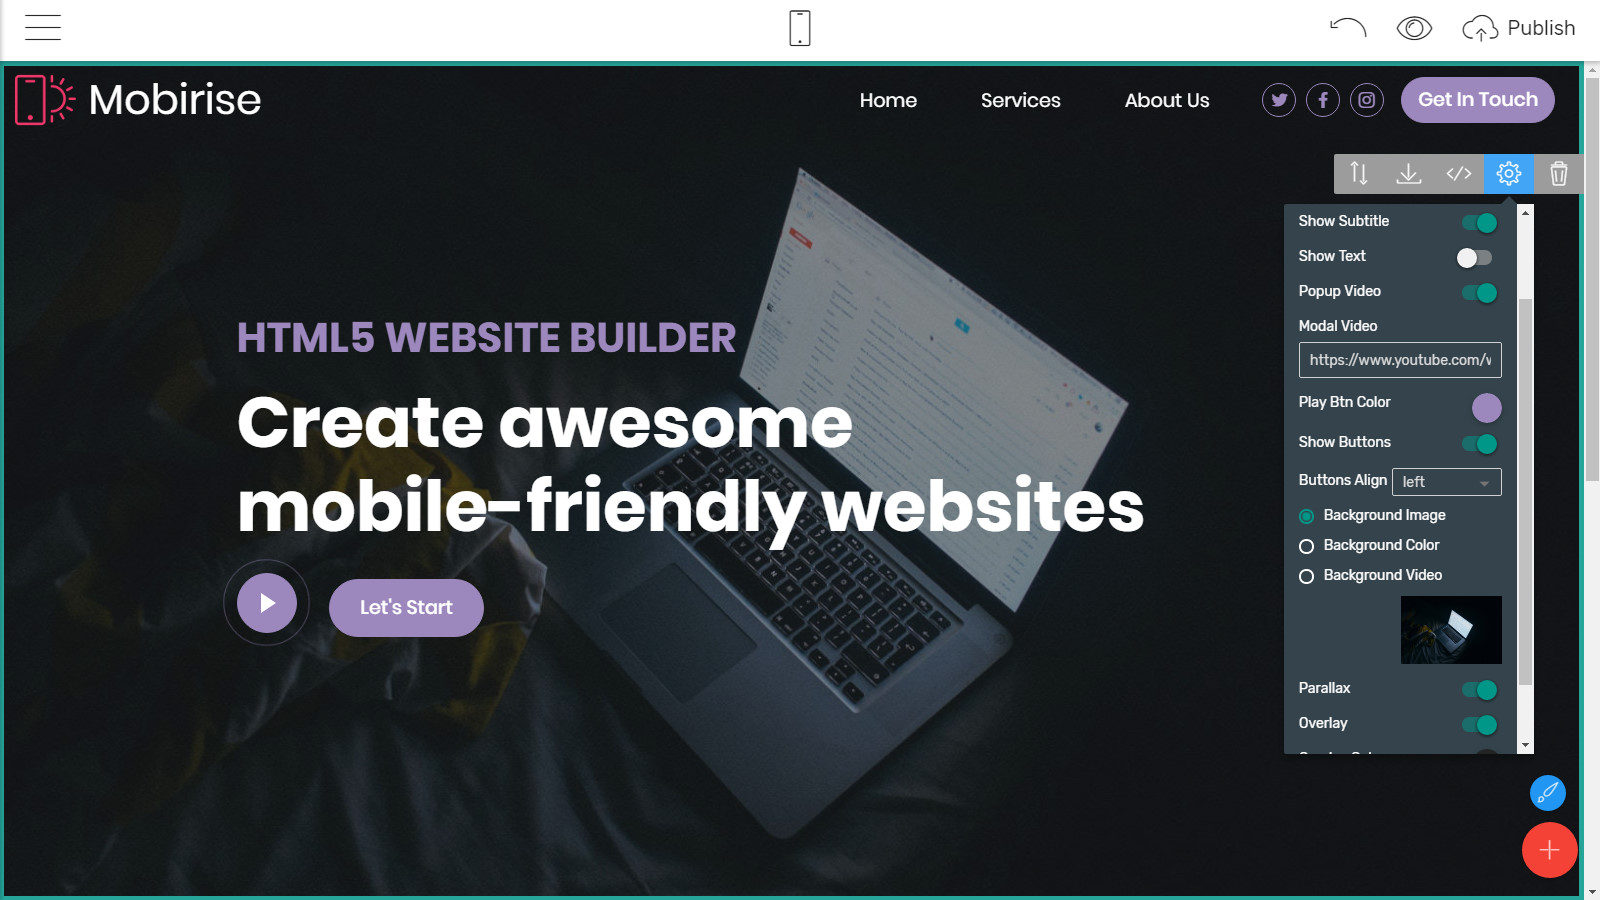 mobile-friendly website layouts